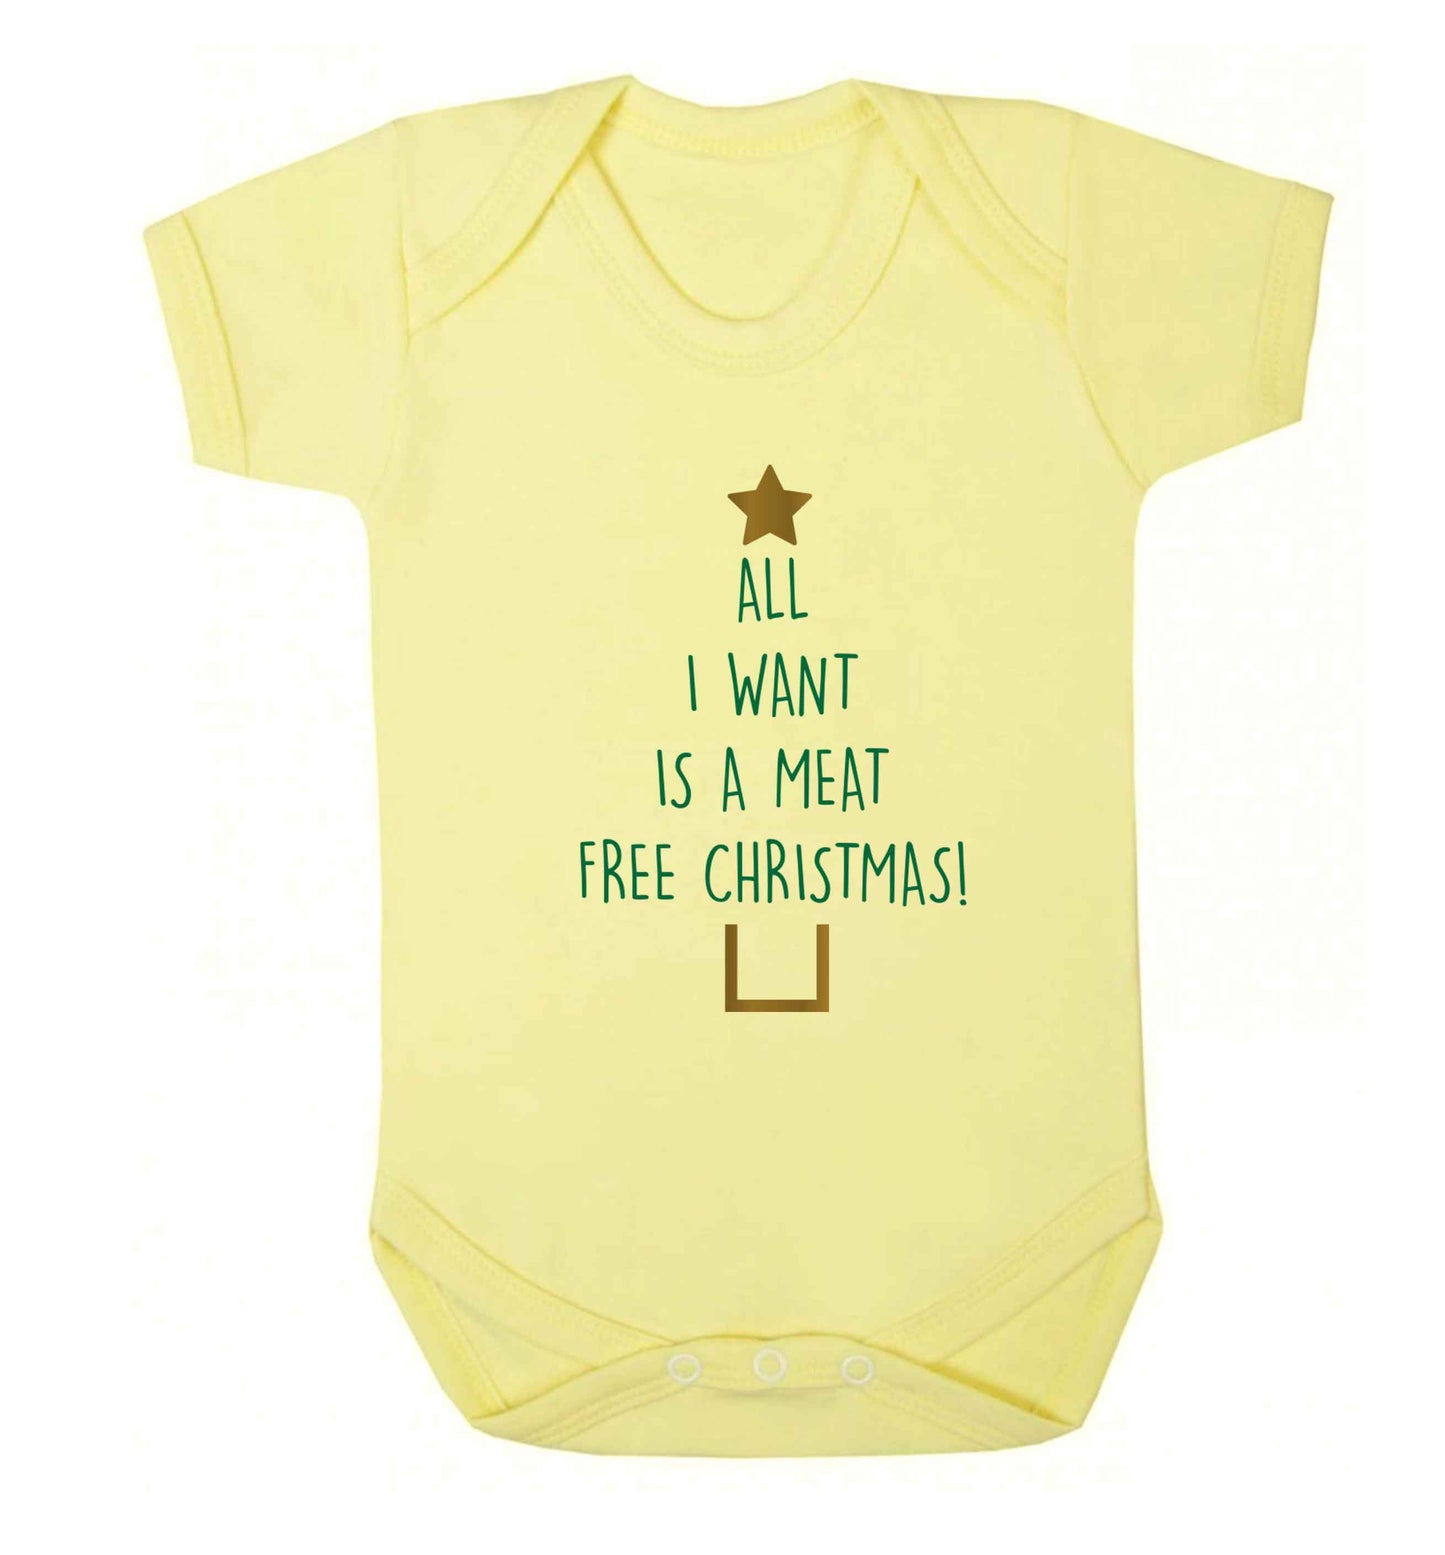 All I want is a meat free Christmas Baby Vest pale yellow 18-24 months